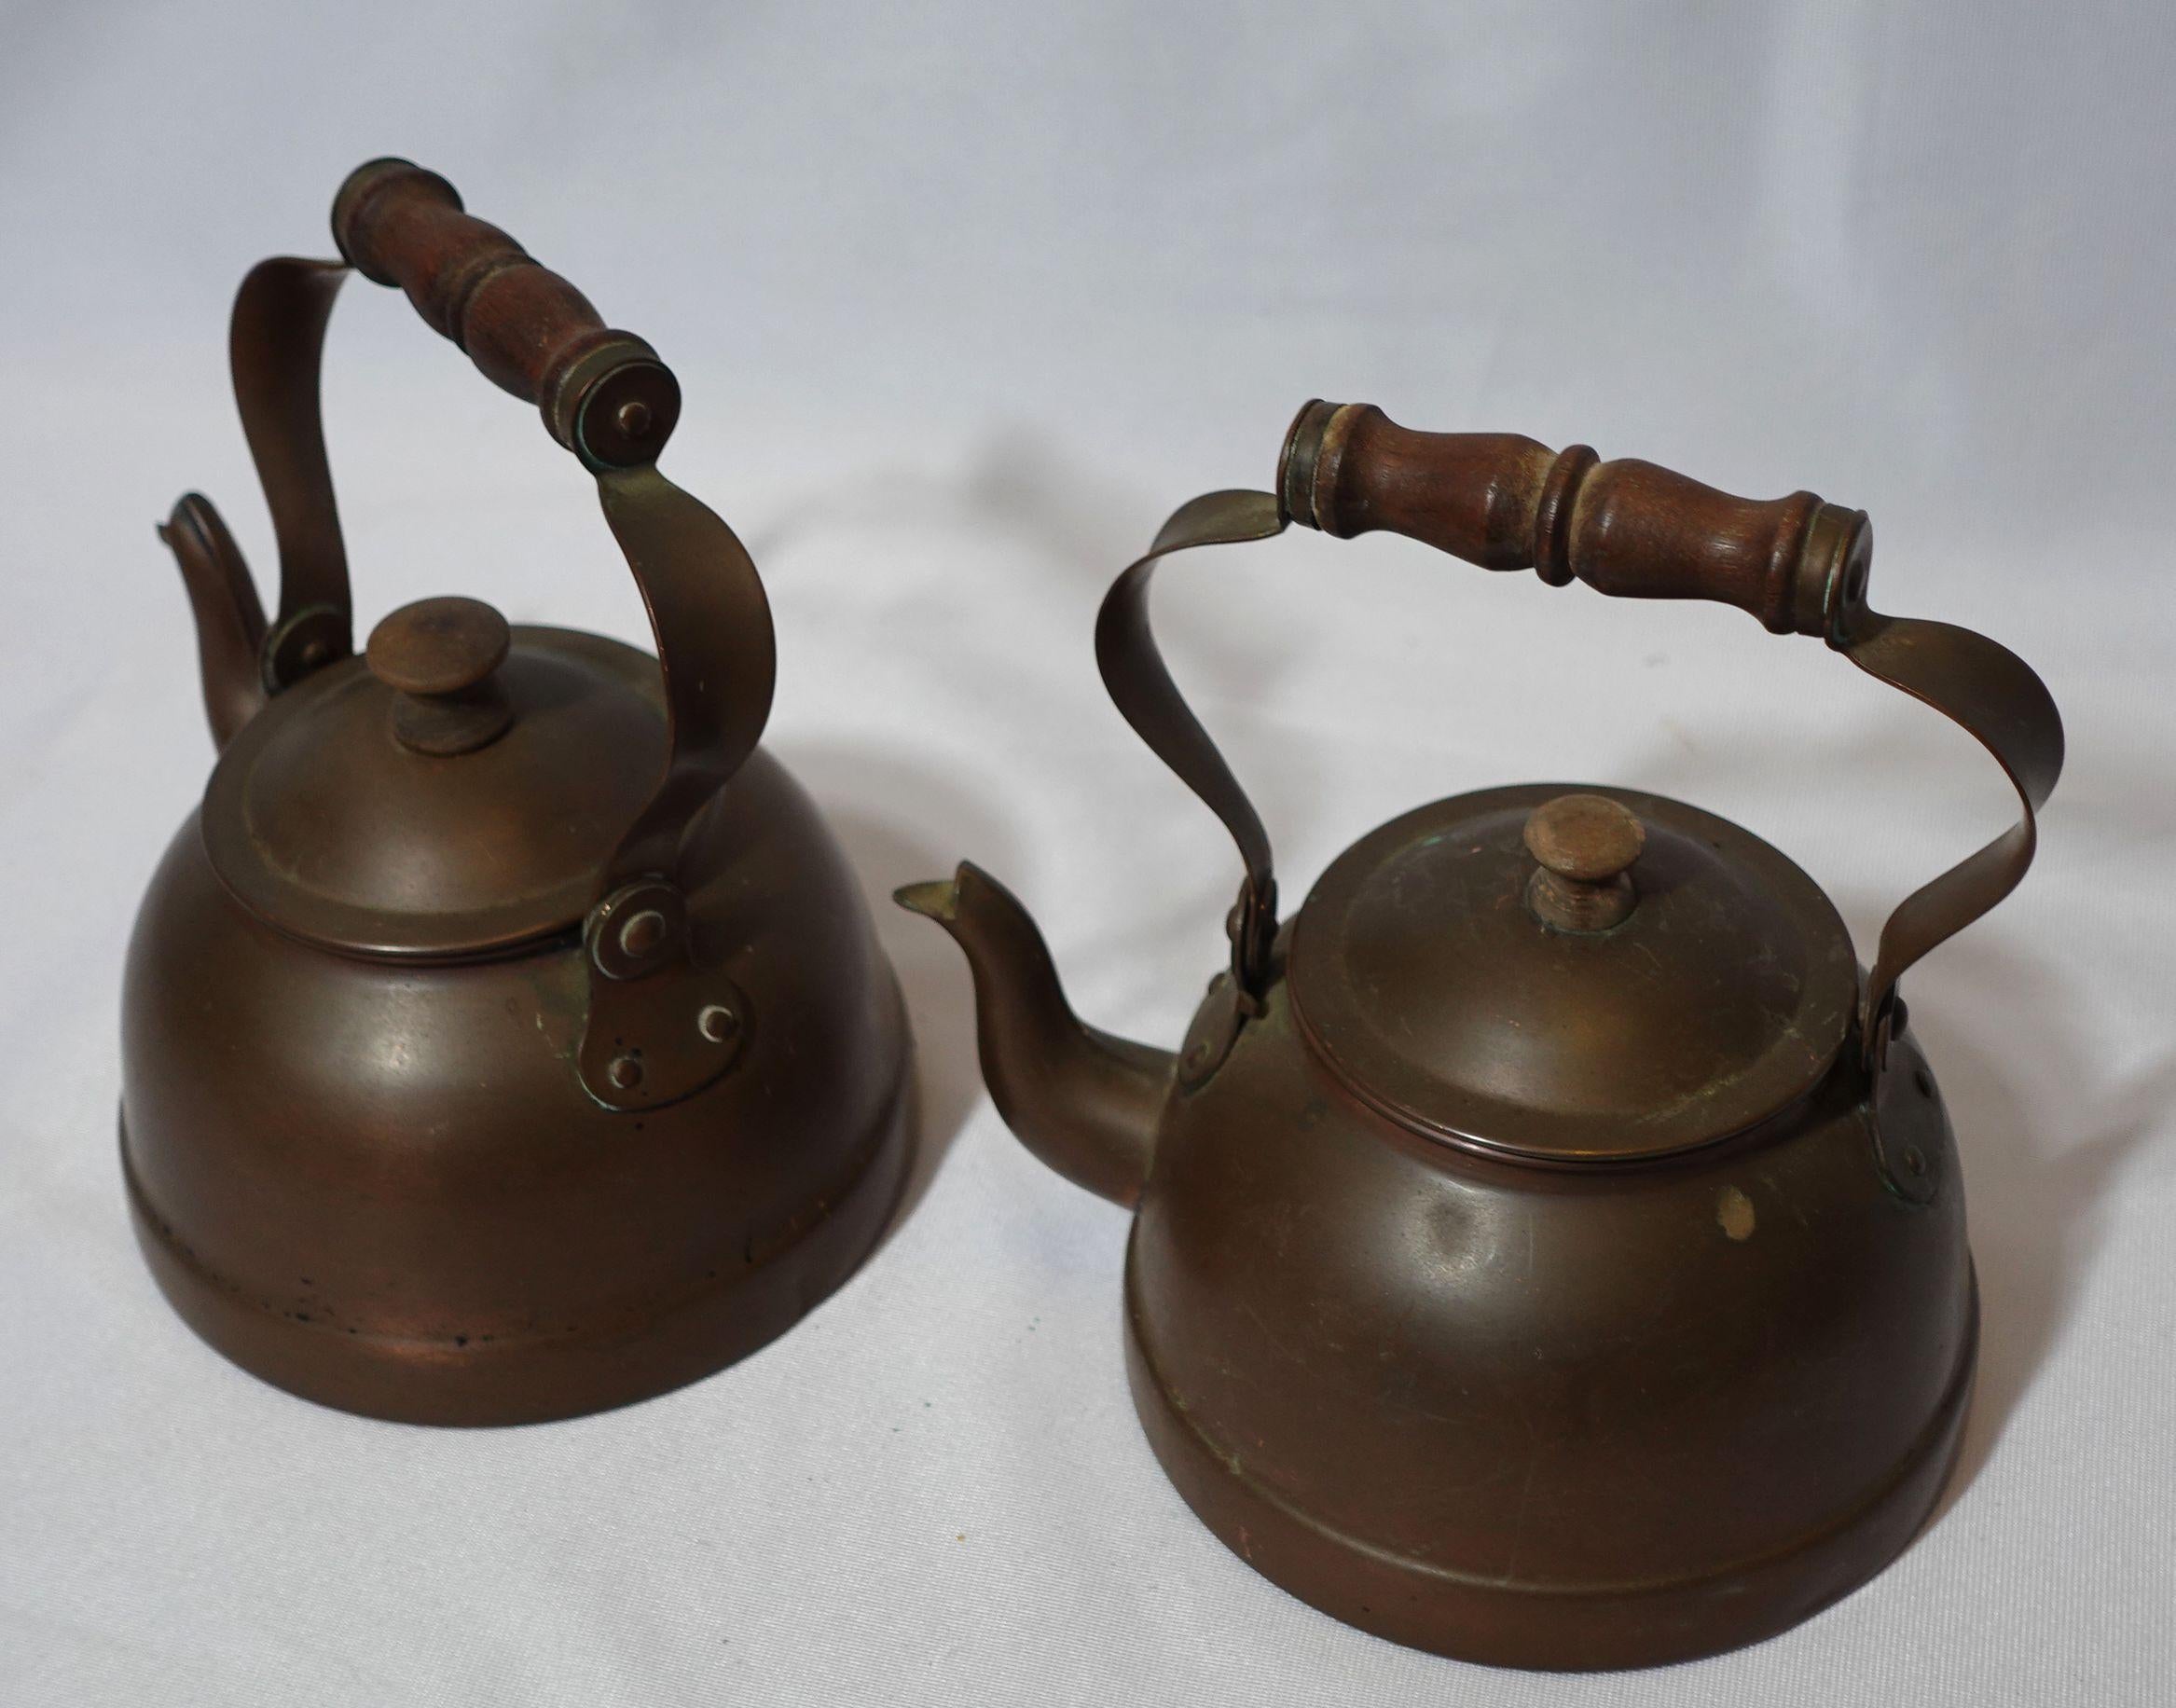 Pair of Portugal Copper Tea Kettle, TC#09-1 & 2, from the mid-20th century, very well hand-made with delicate craftsmanship, and highly collectible antique.
